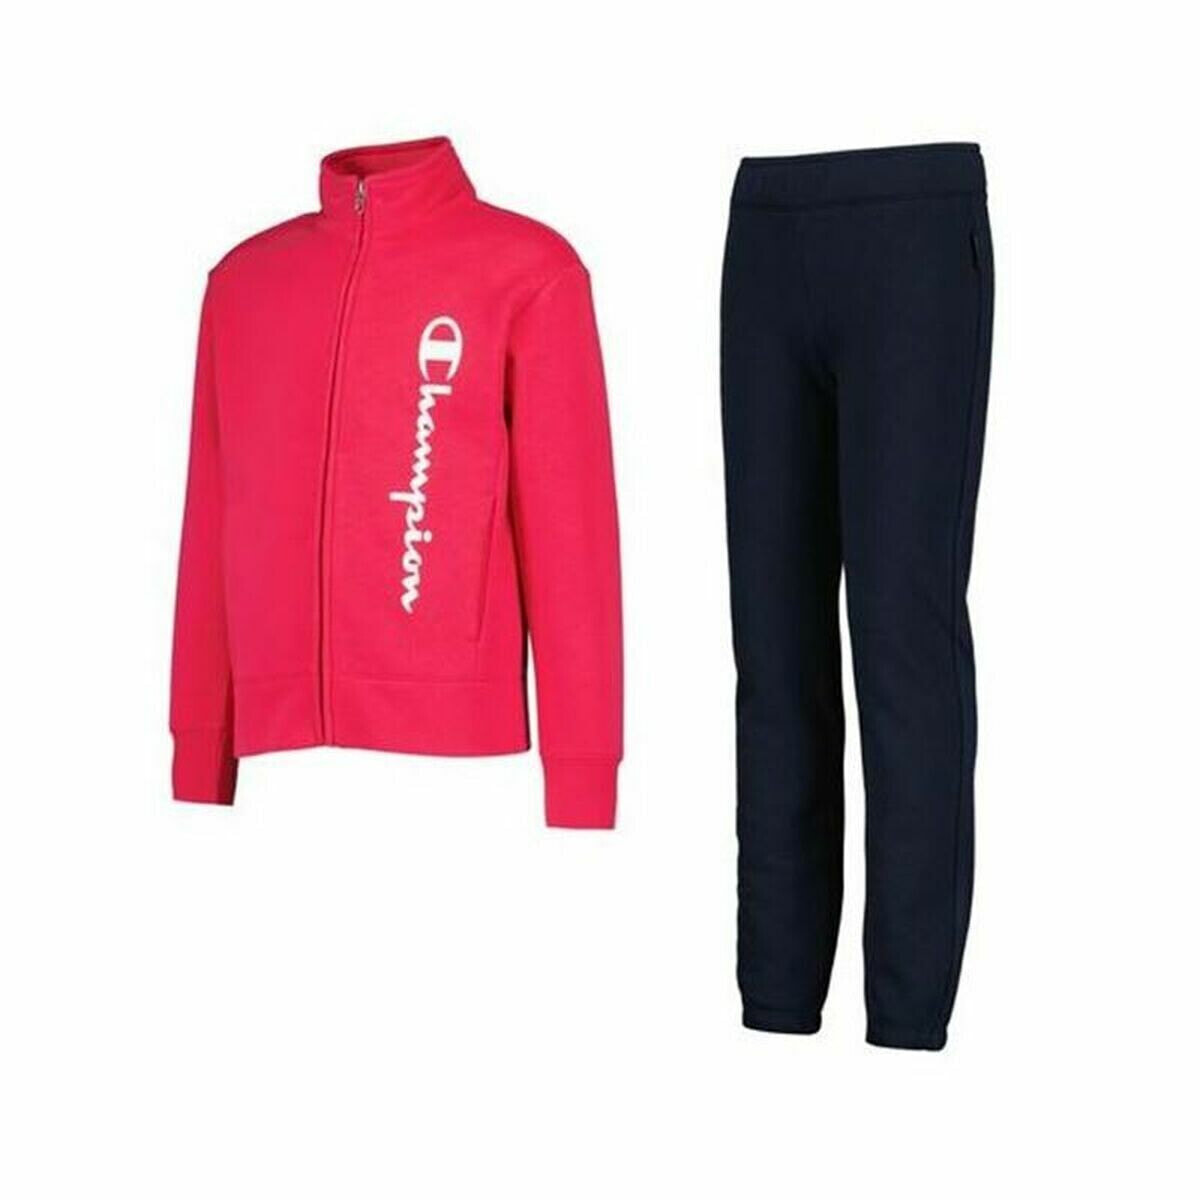 Children’s Tracksuit Champion Roger Smith Pink